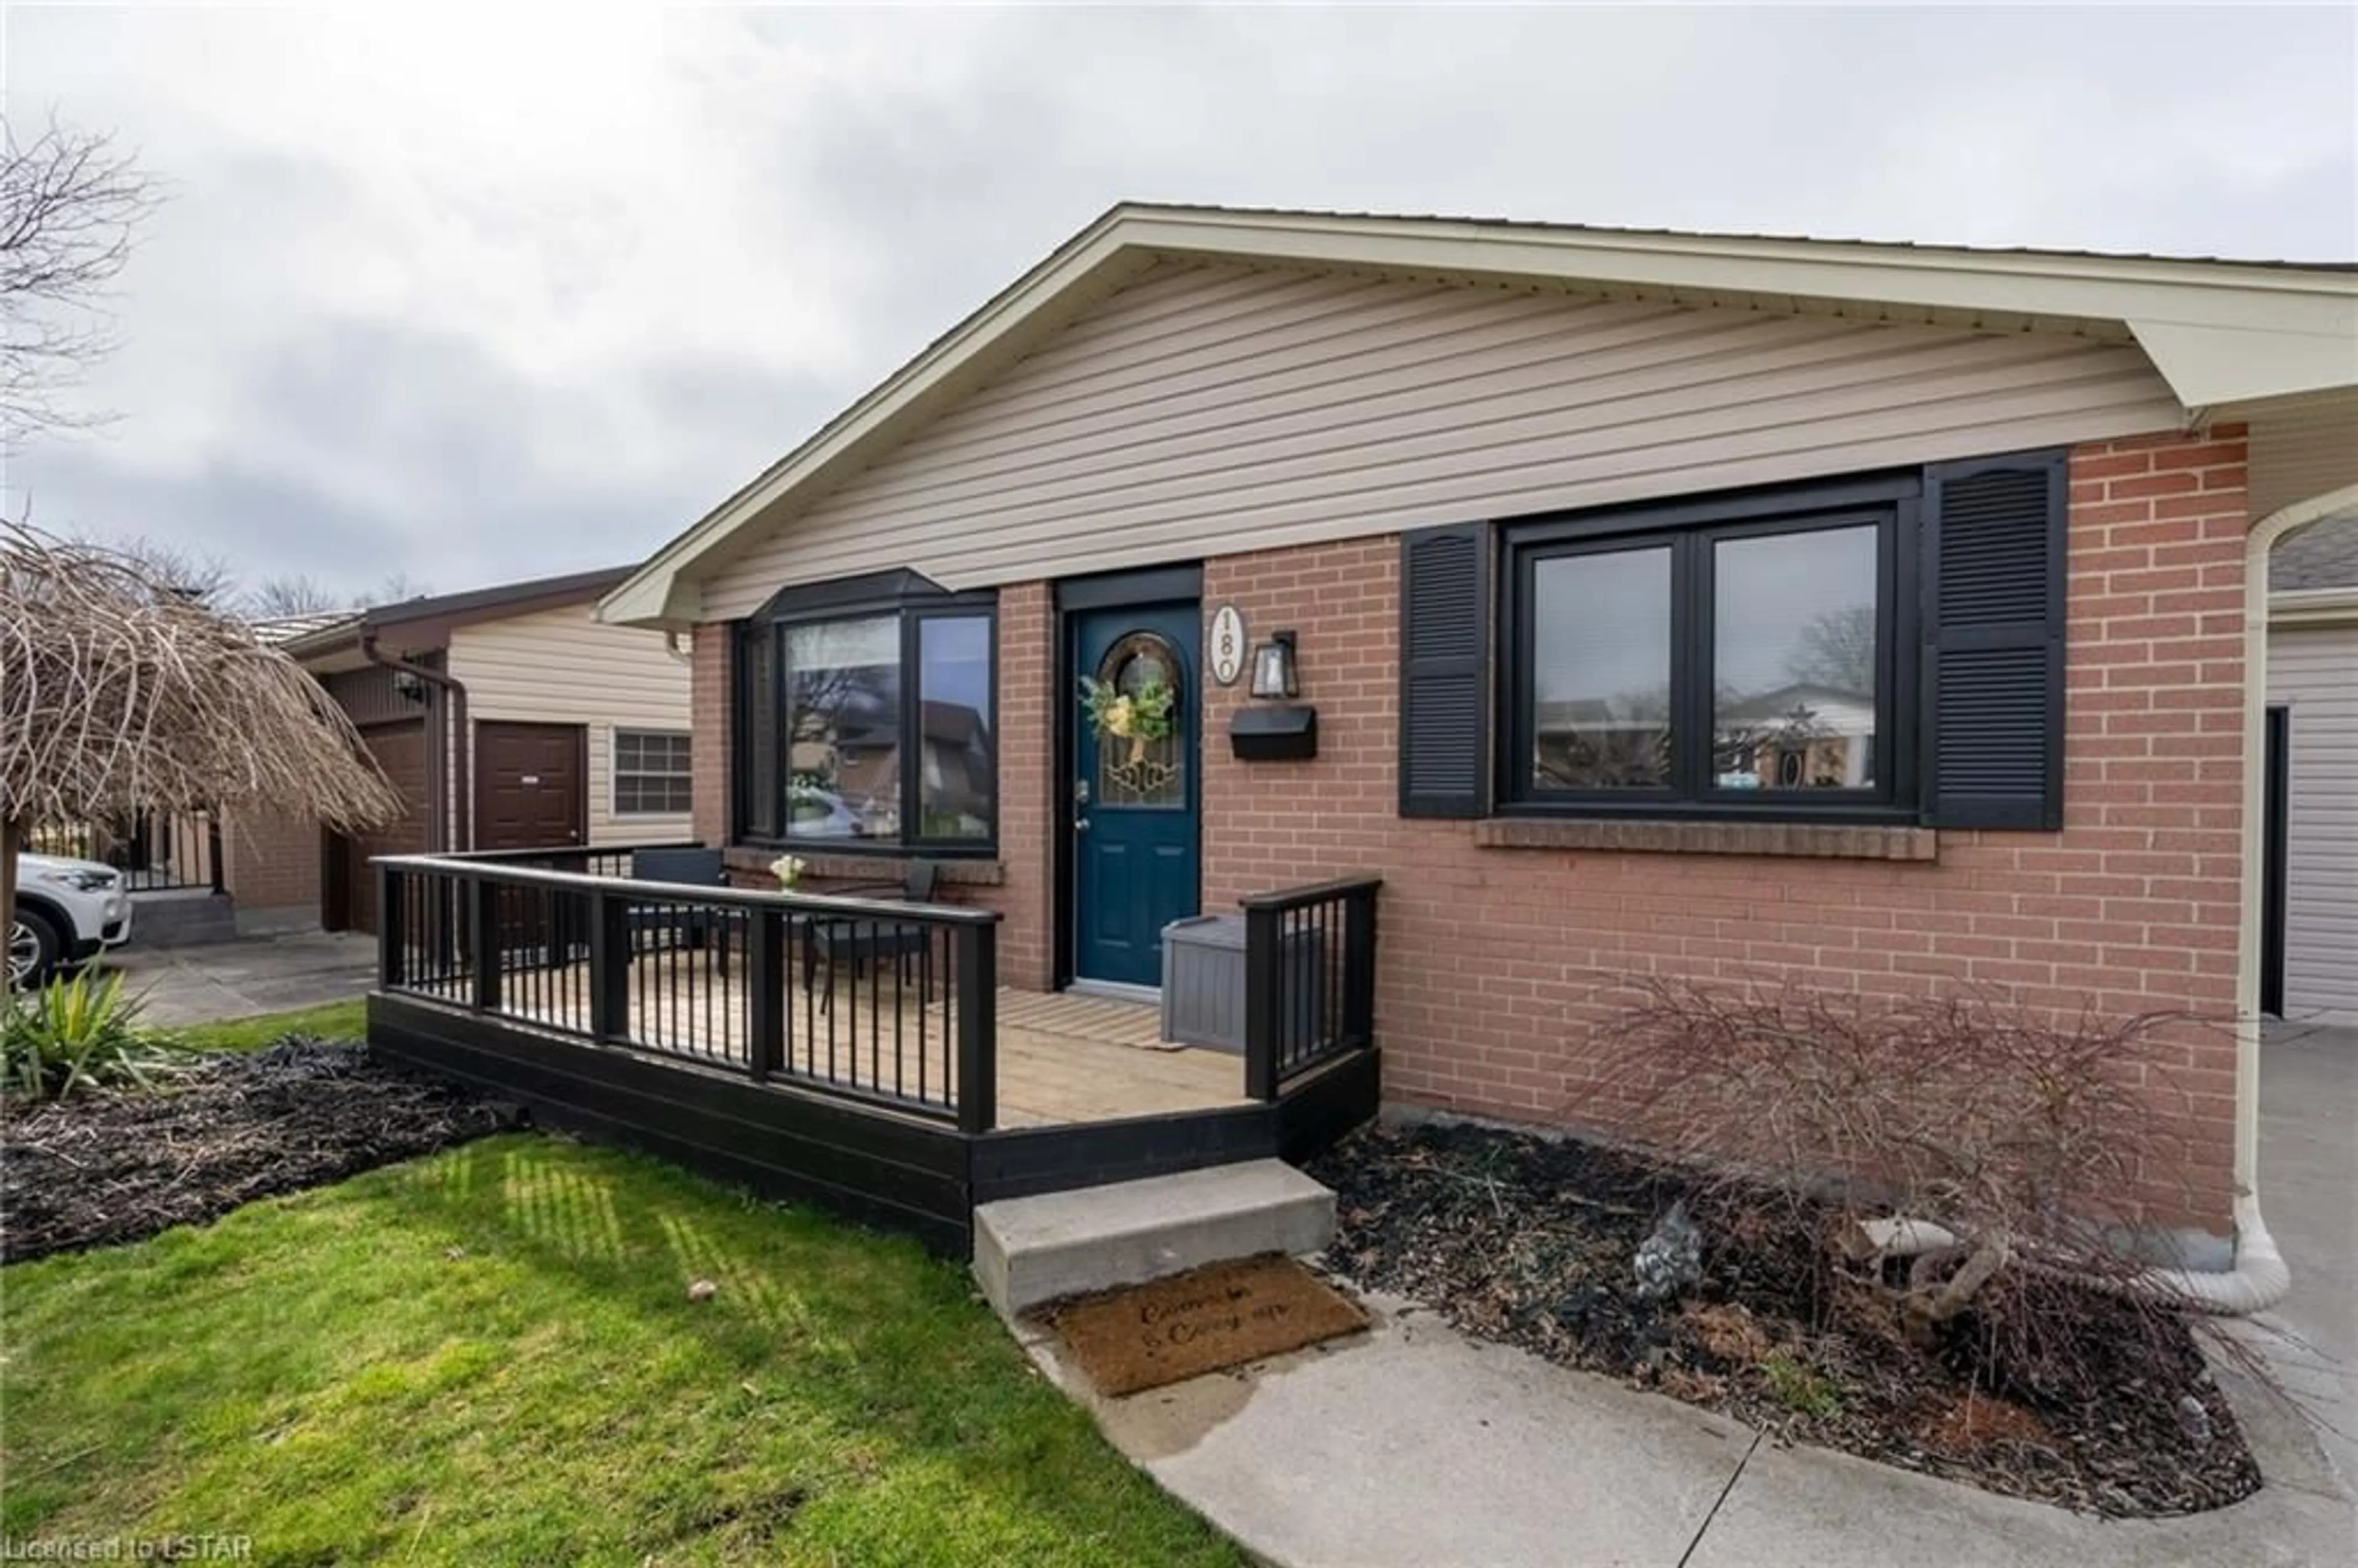 Home with brick exterior material for 180 Kipling Ave, London Ontario N5V 1K2